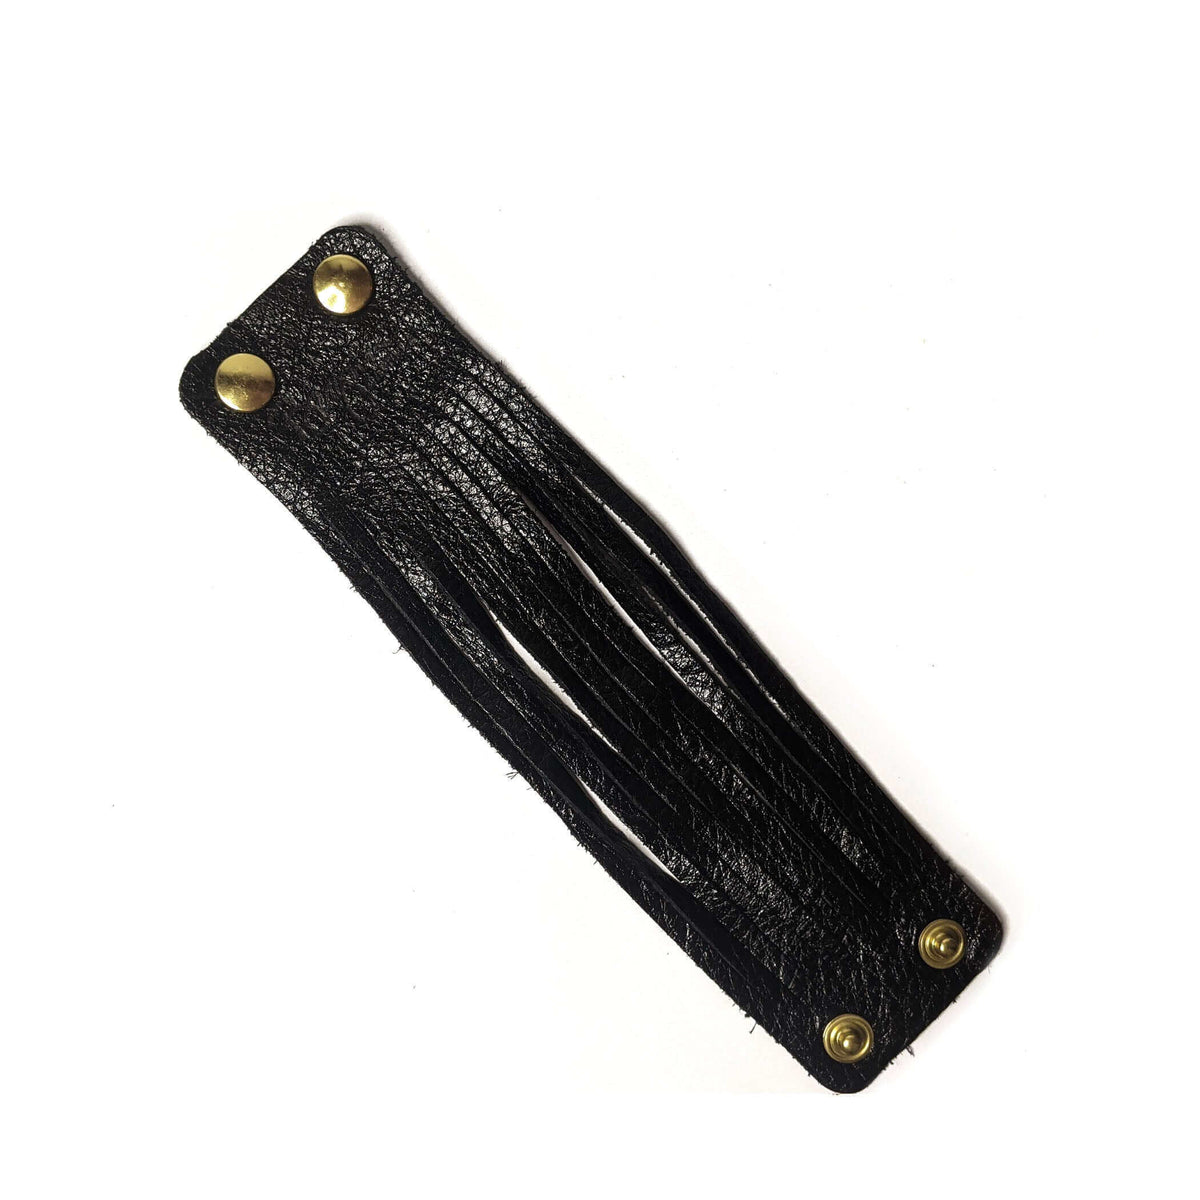 Fringe Leather Bracelet in Black, Brynn Capella, Made in the USA